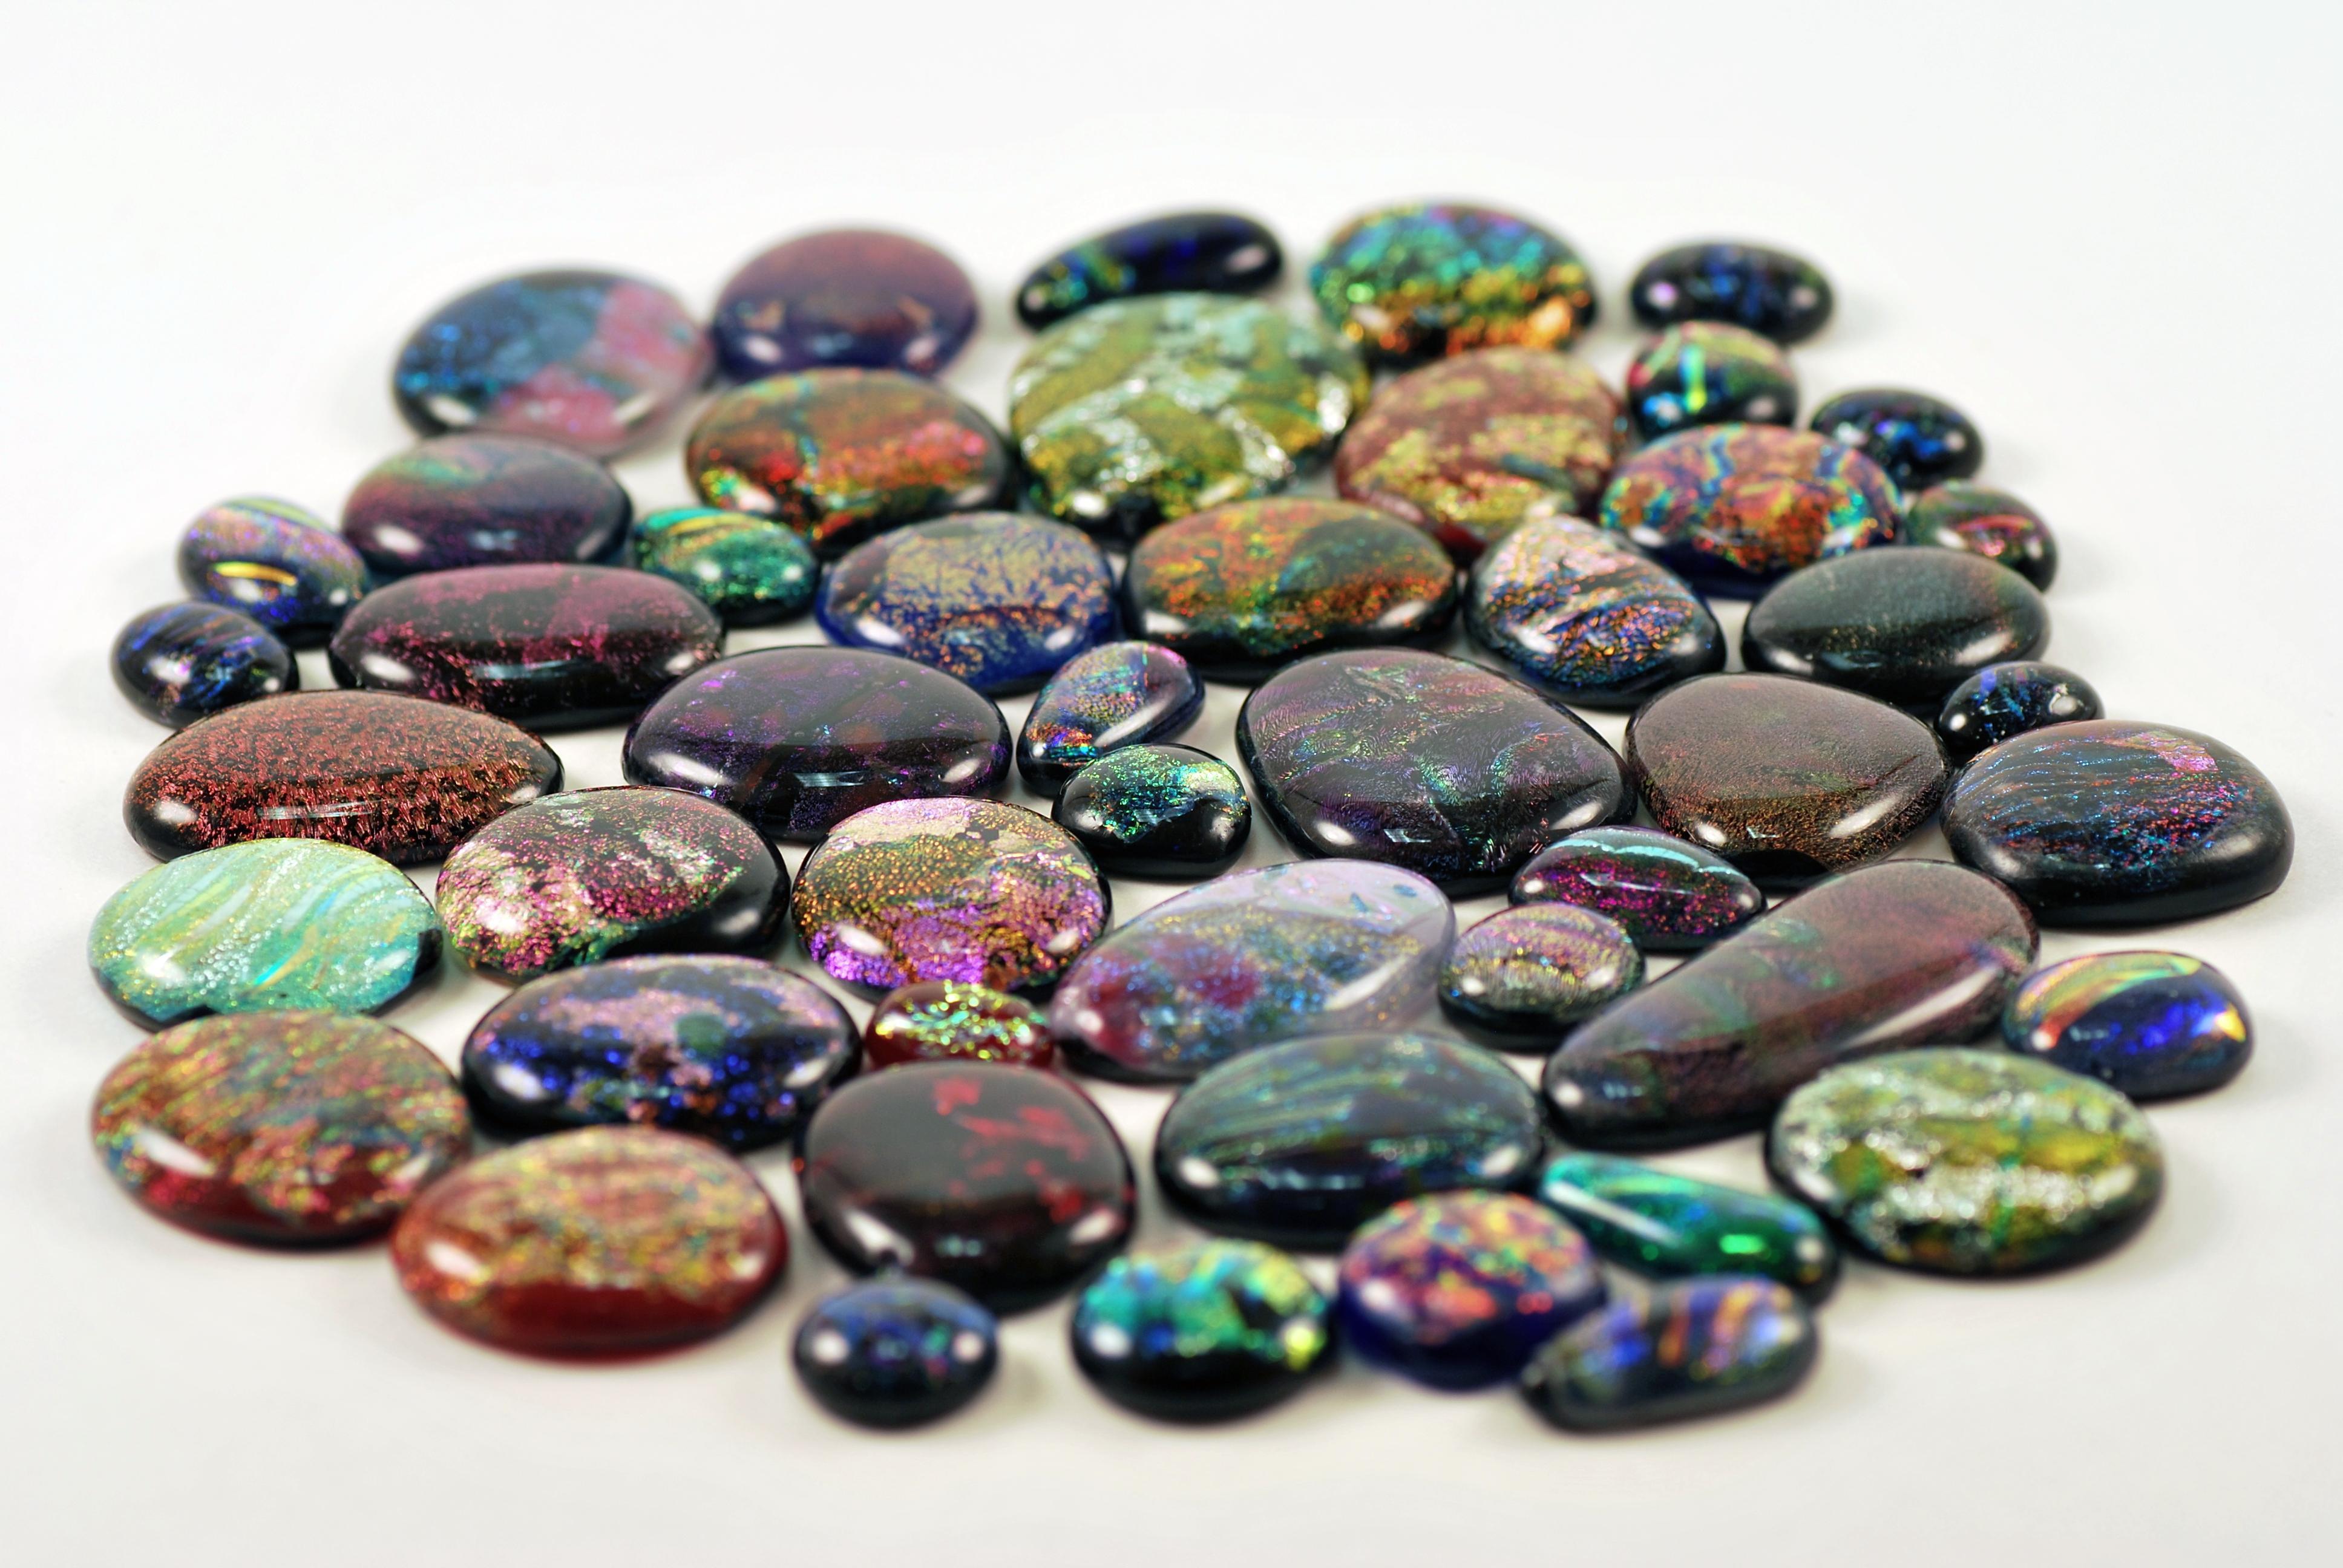 Gemstones wallpaper and picture with jewelry, photo jewelry